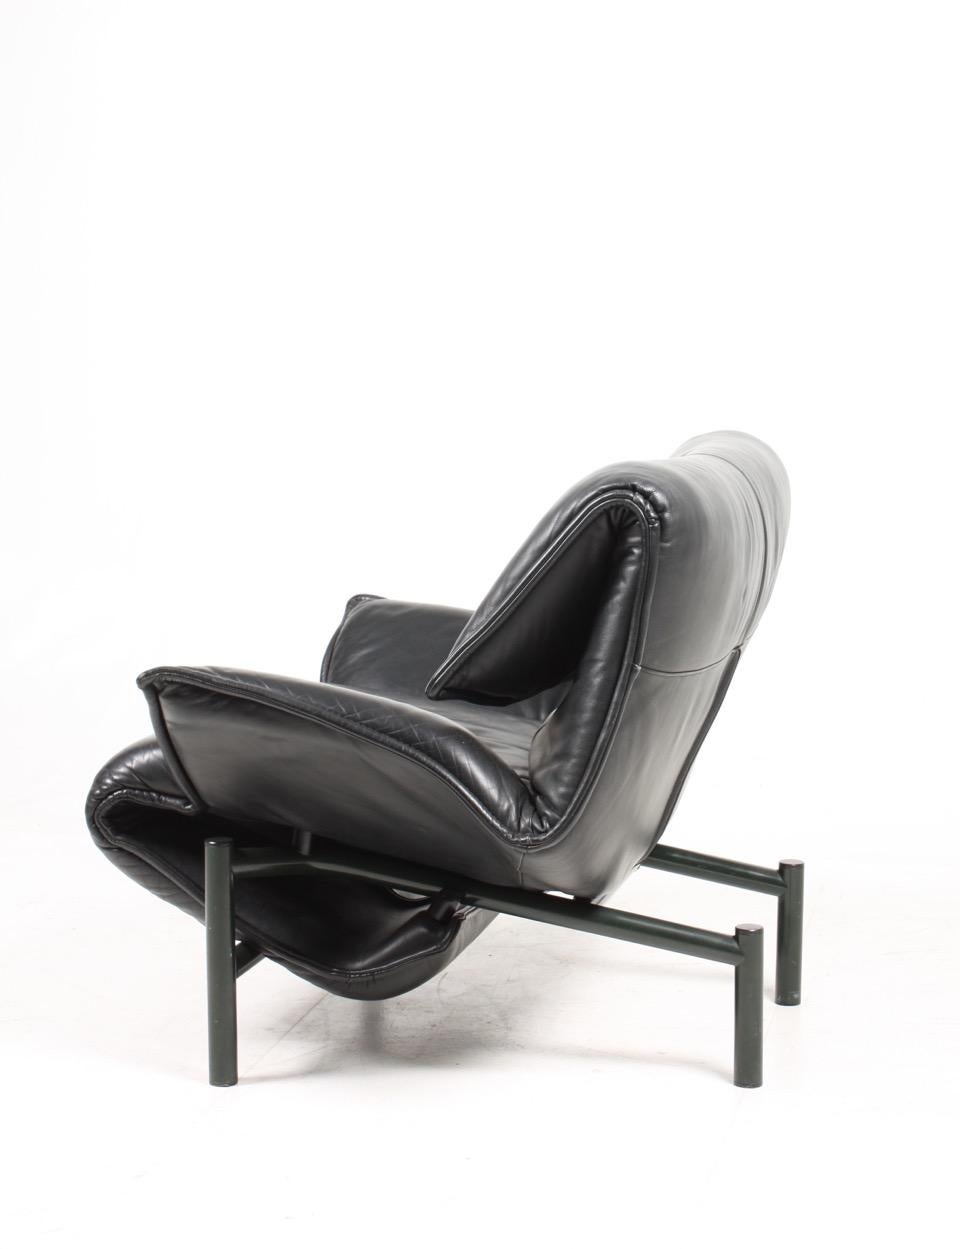 Mid-Century Modern Modern Design Lounge Chair in Patinated Leather by Vico Magistretti